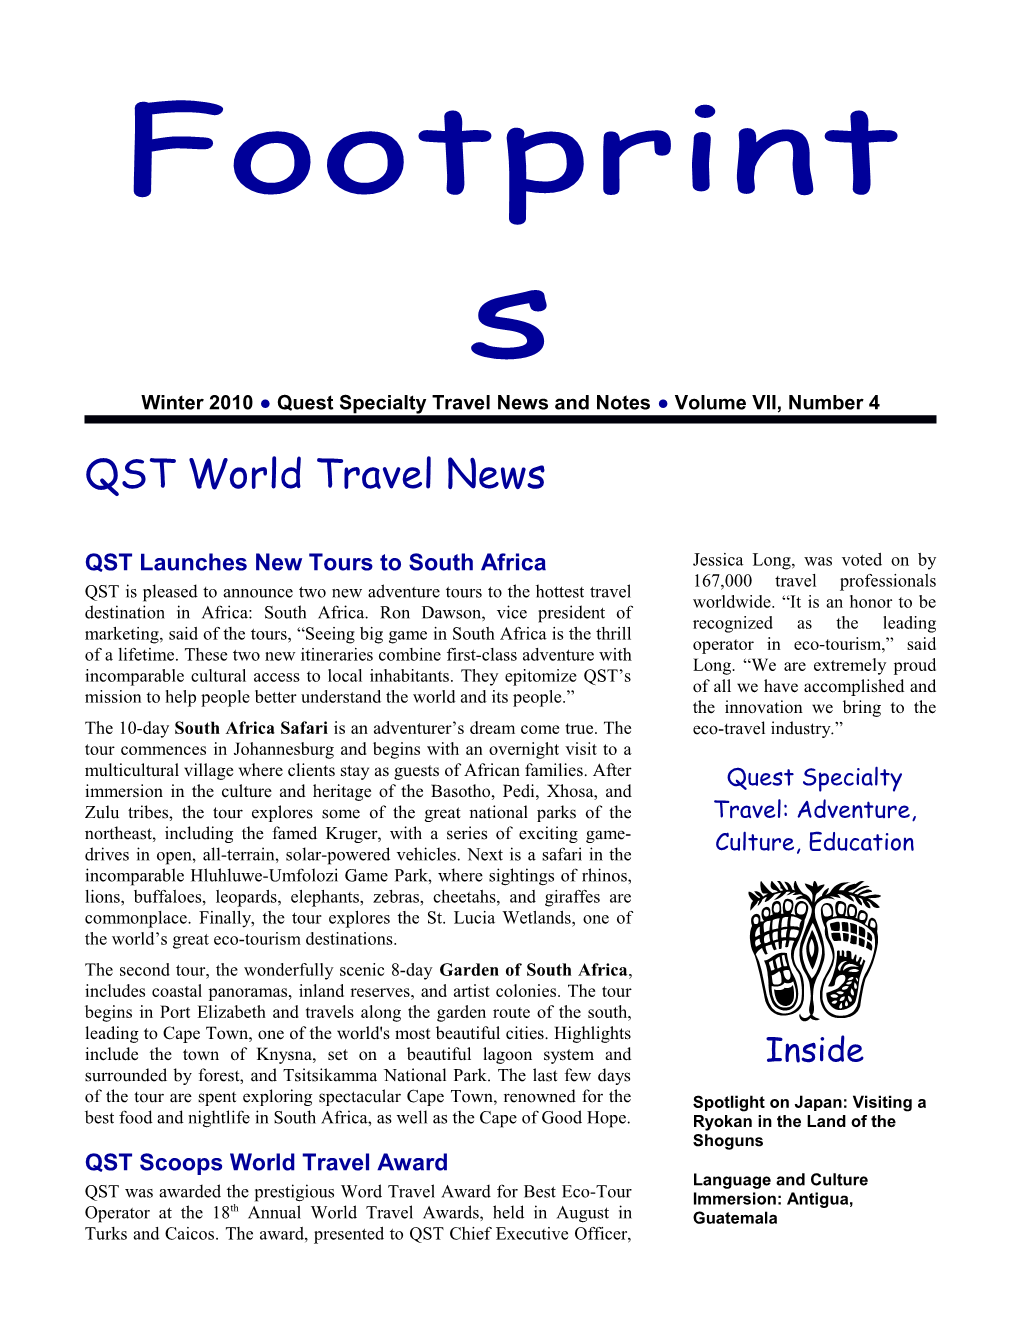 Winter 2010 Quest Specialty Travel News and Notes Volume VII, Number 4